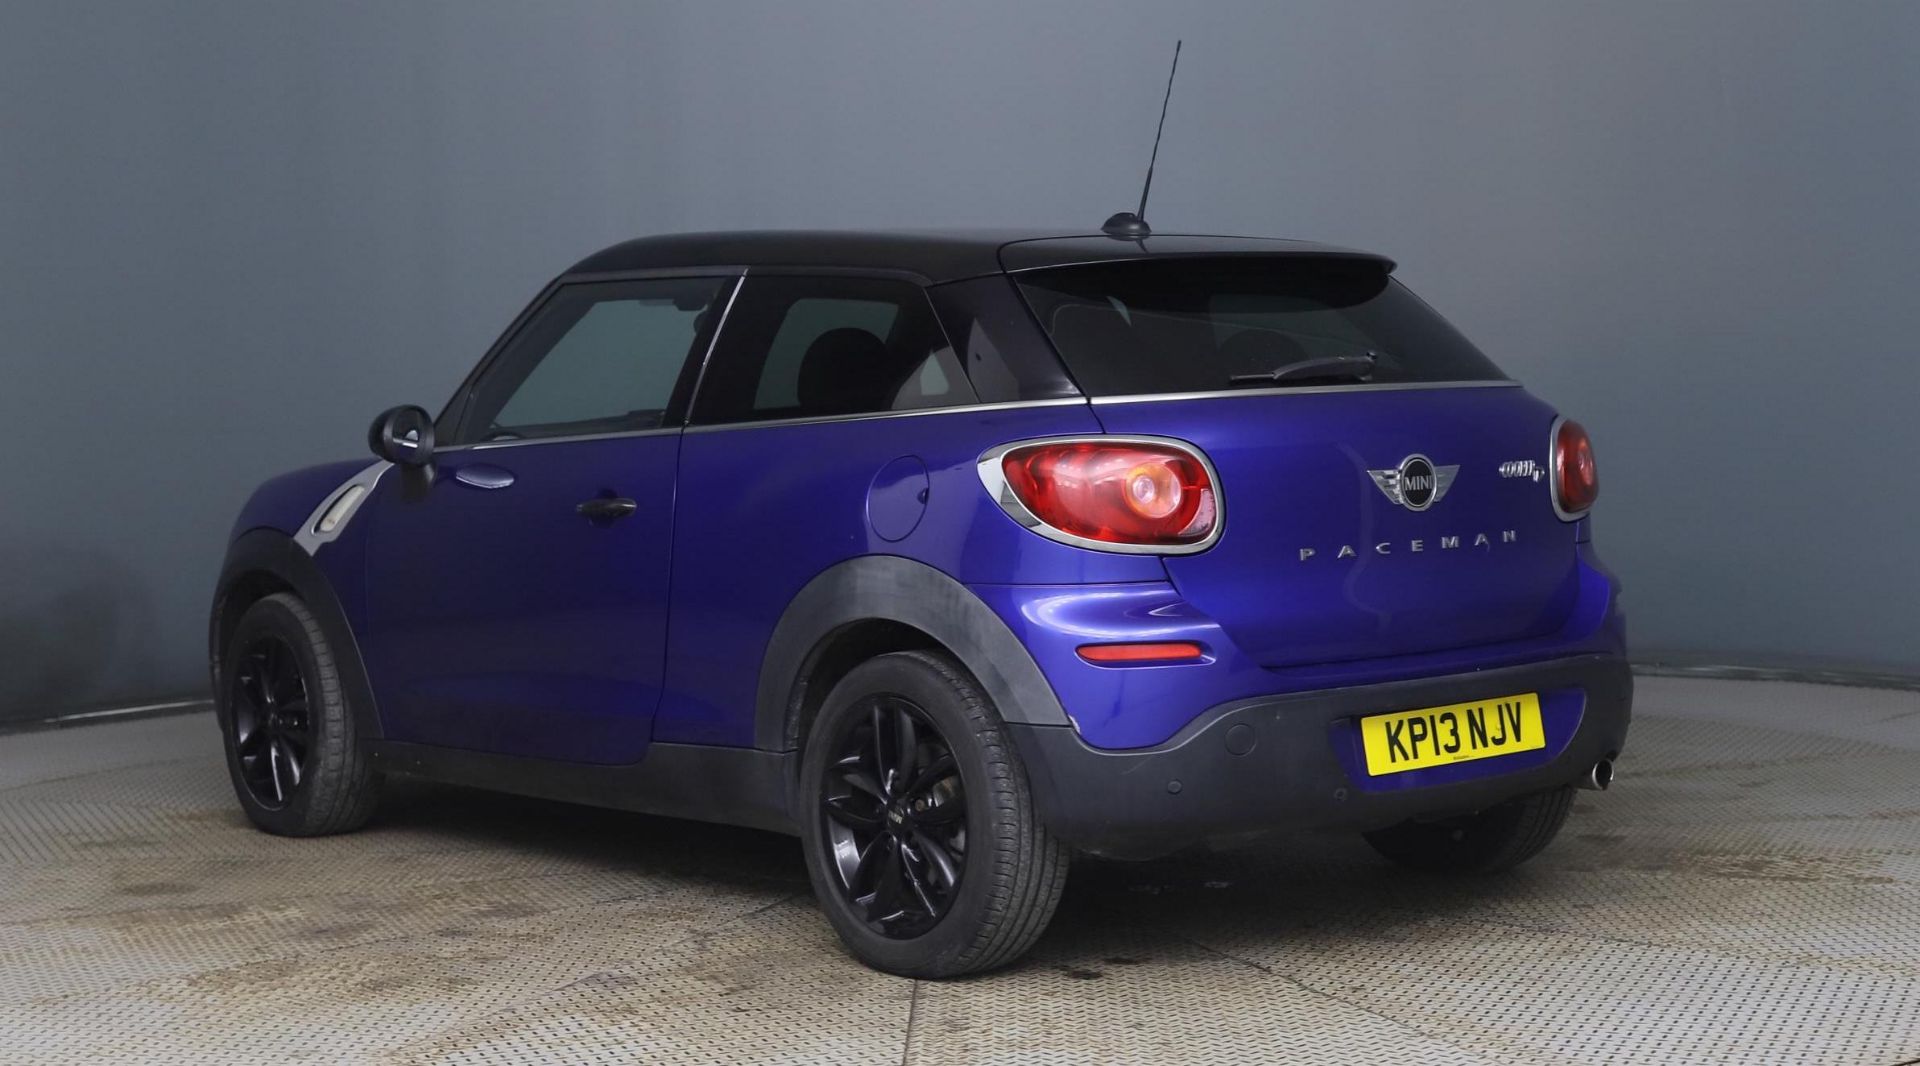 Mini Cooper PaceMan 1.6 D ALL4 Coupe 2013 '13 Reg' A/C - No Vat - Only 106,145 Miles - Image 6 of 12